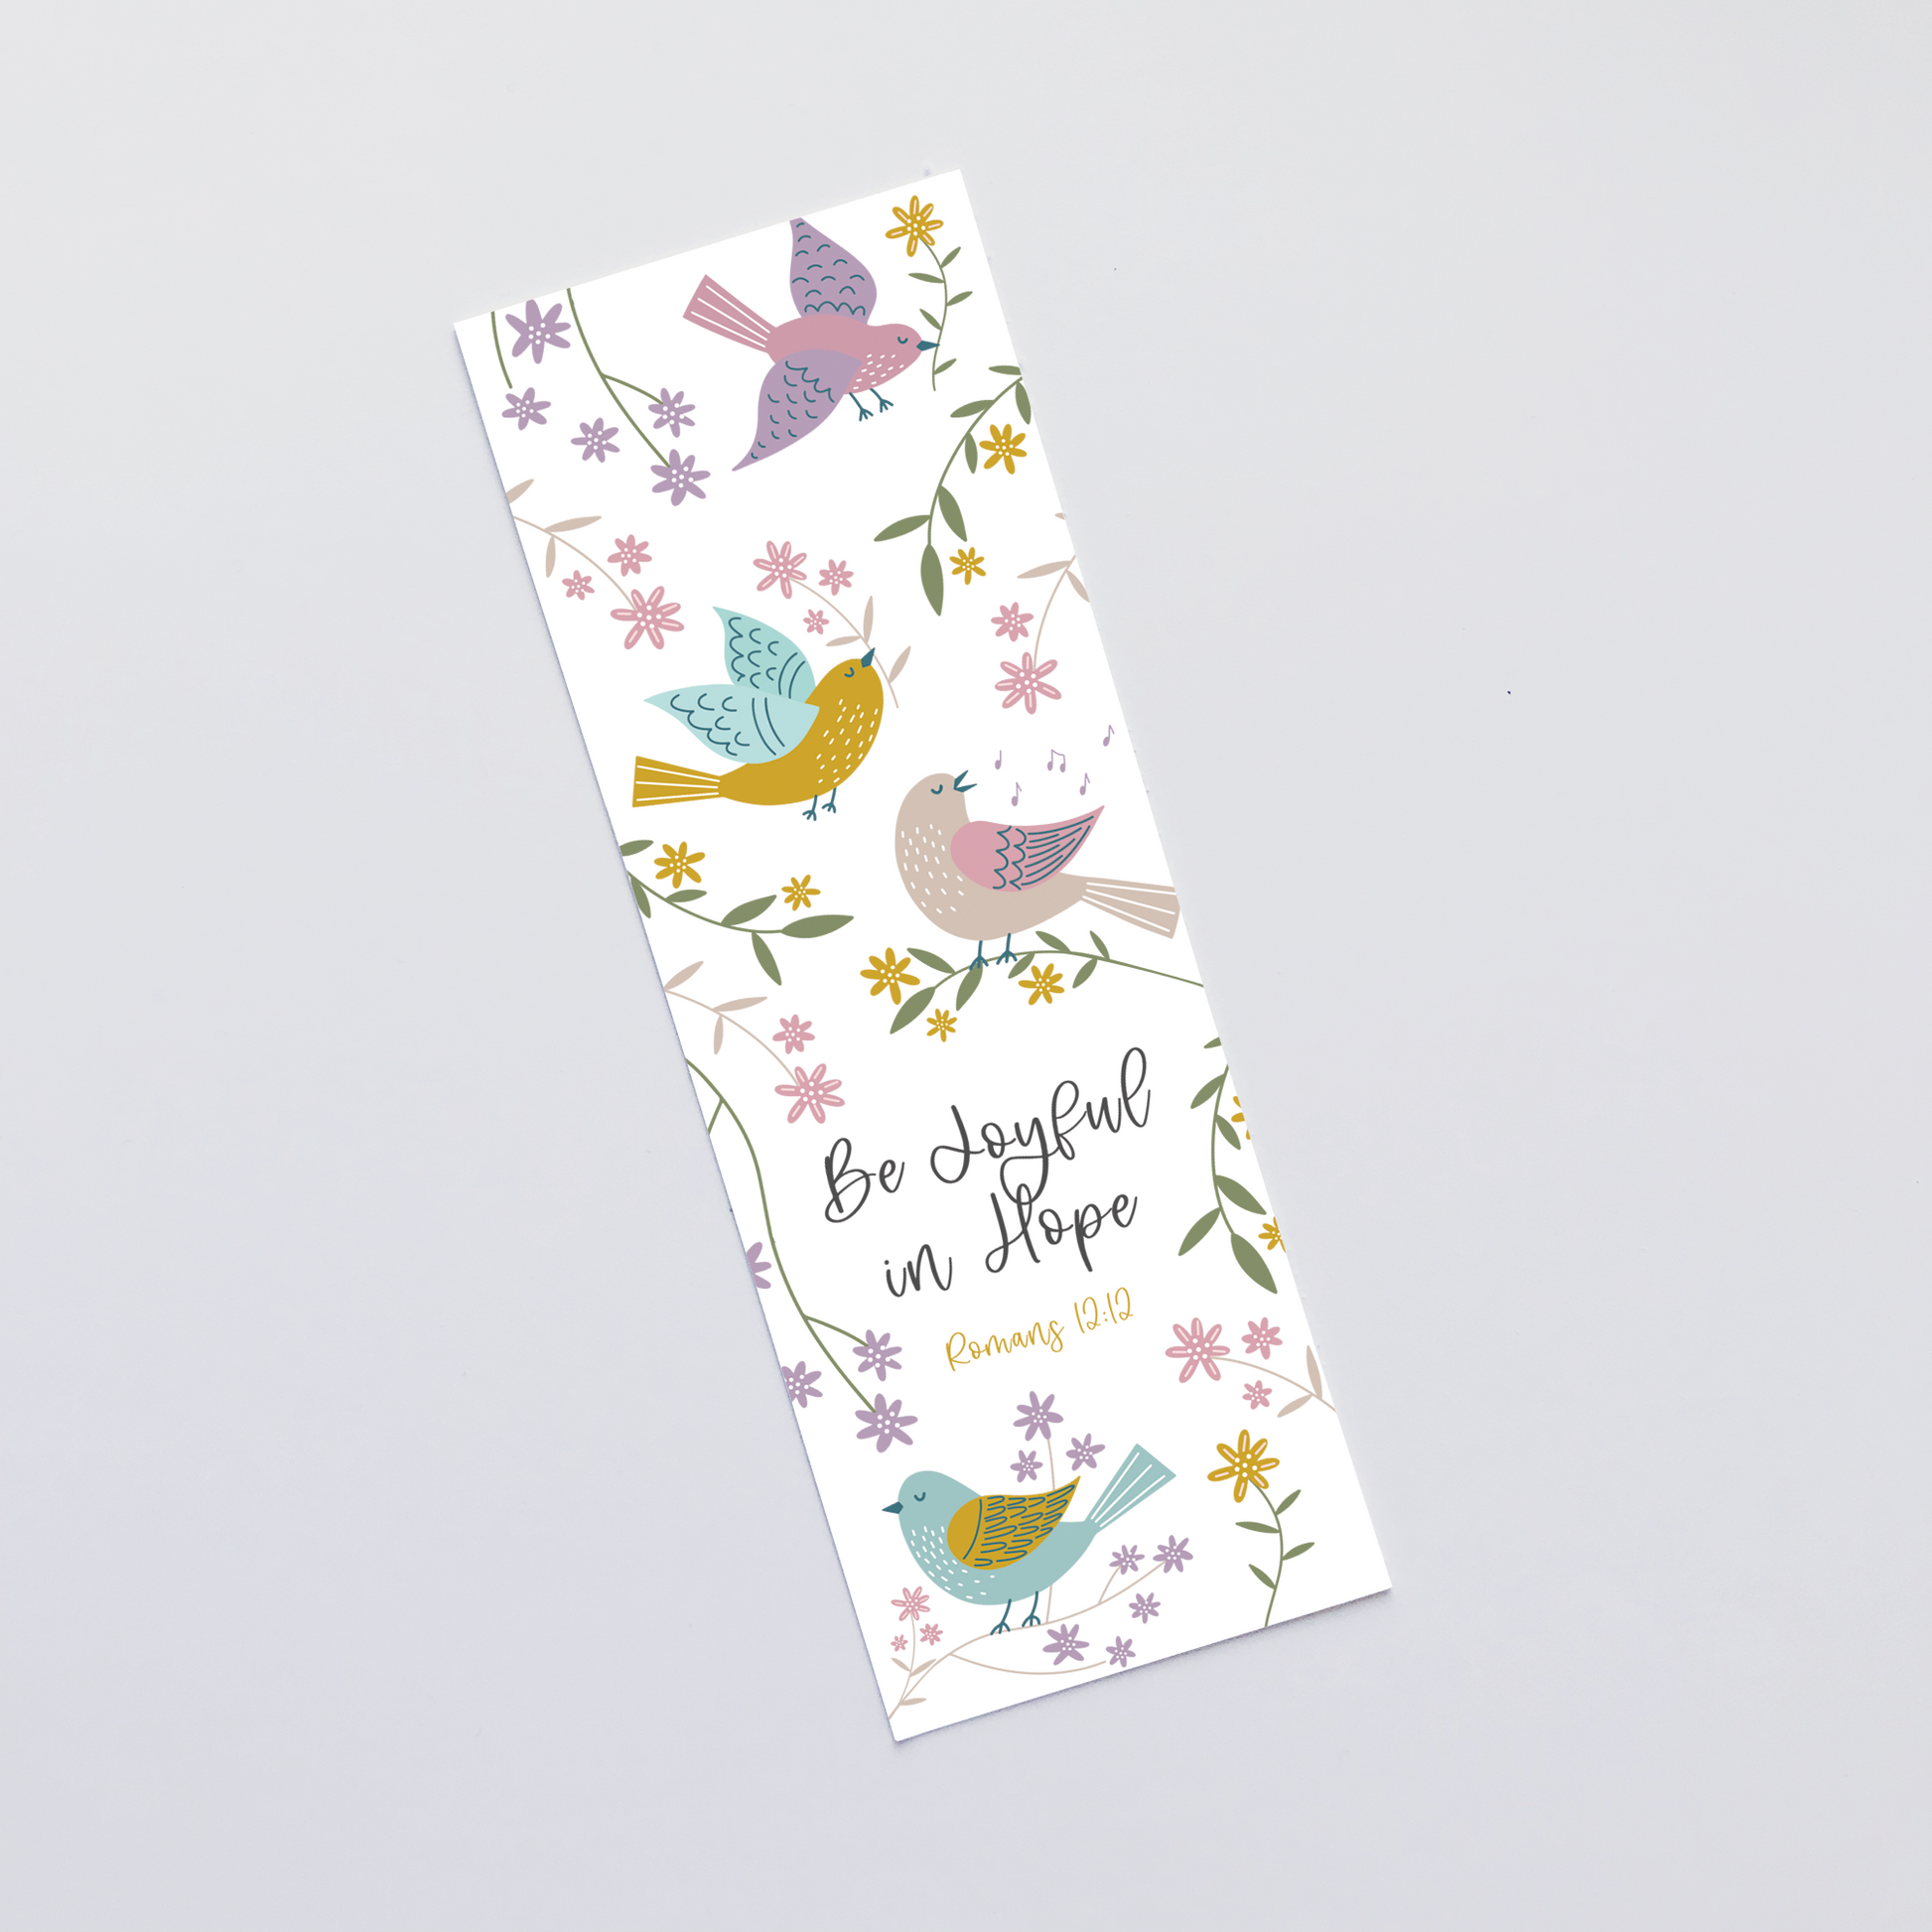 Christian Bookmark Gift - Be Joyful in Hope Romans 12:12 - The Wee Sparrow